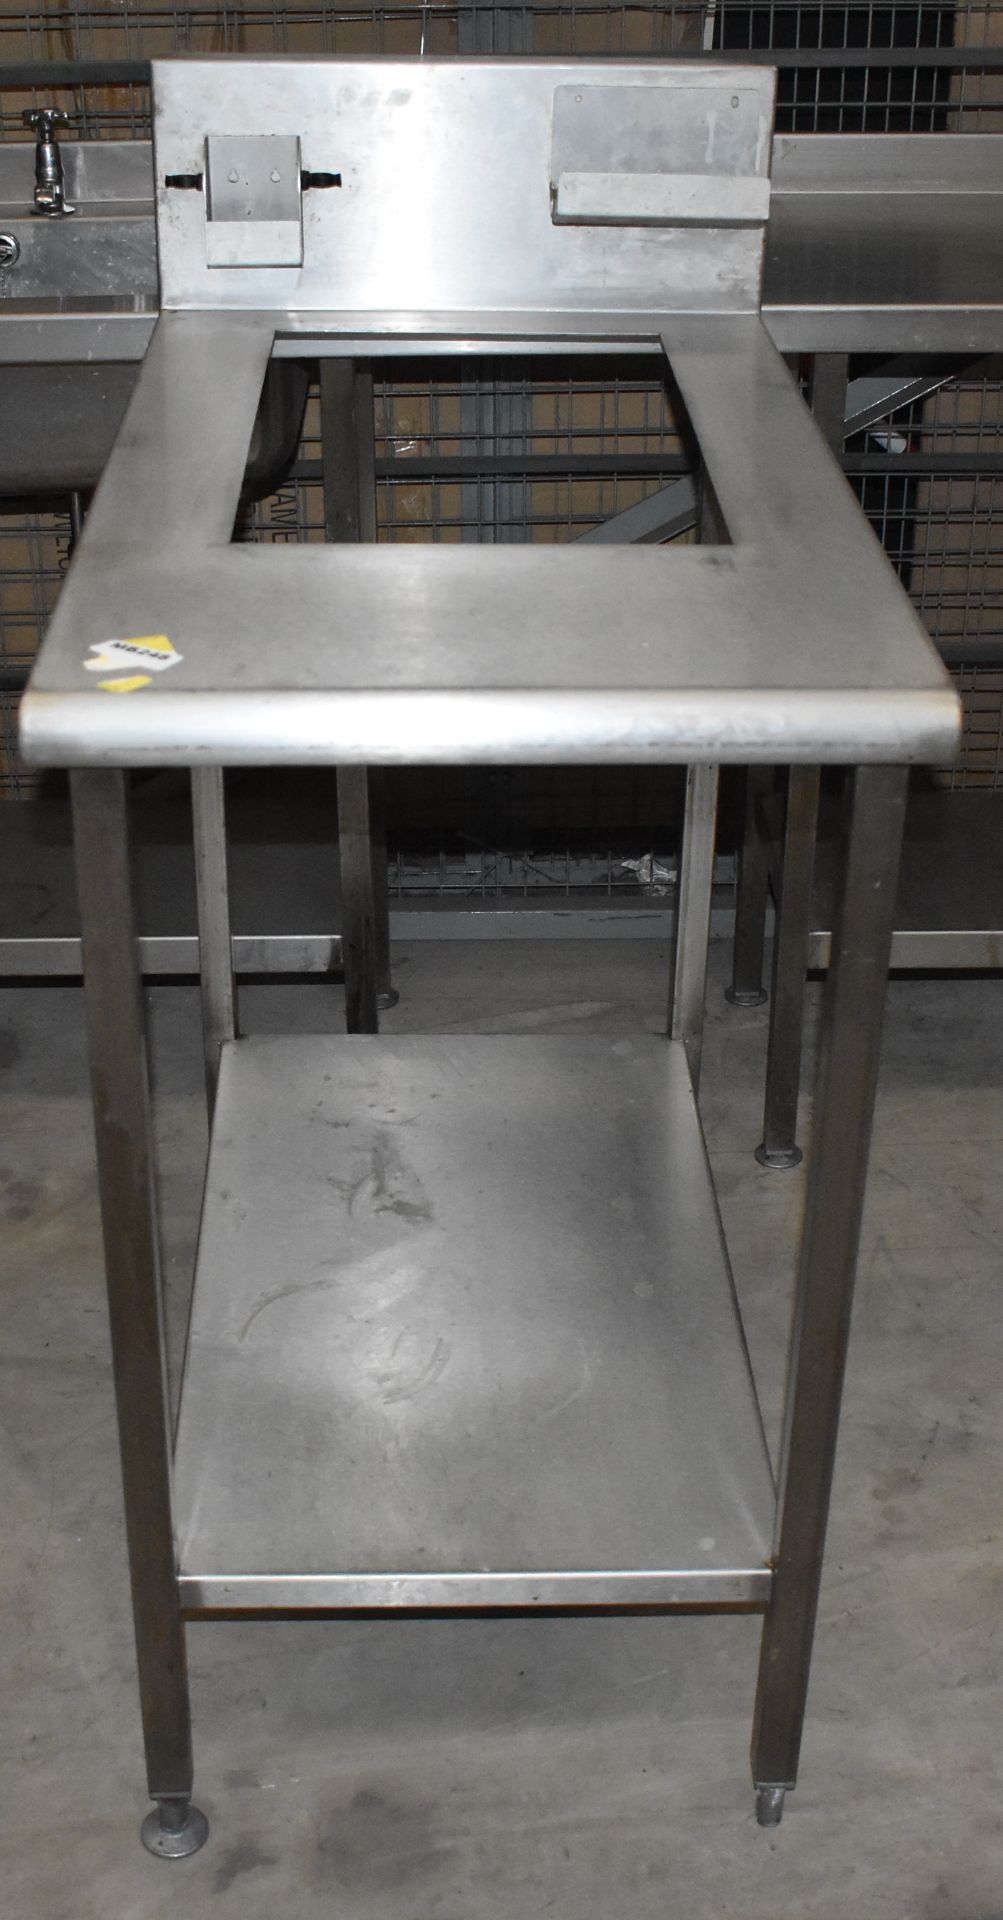 1 x Stainless Steel Table With Gastro Pan Insert and Undershelf - H90 x W46 x D88 cms - CL453 - - Image 2 of 2